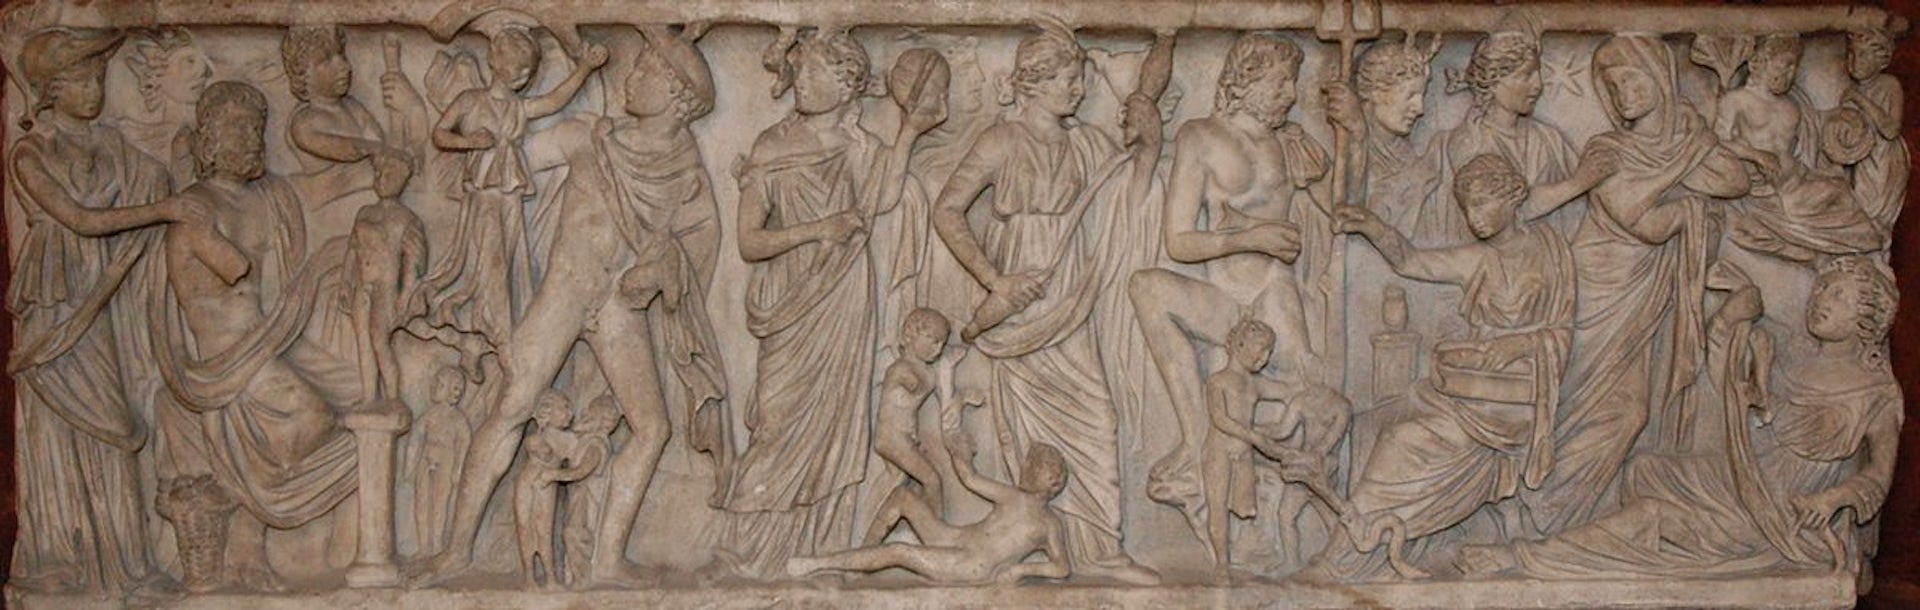 Sarcophagus showing Prometheus, Moirae, and others, ca 240 ad, Louvre